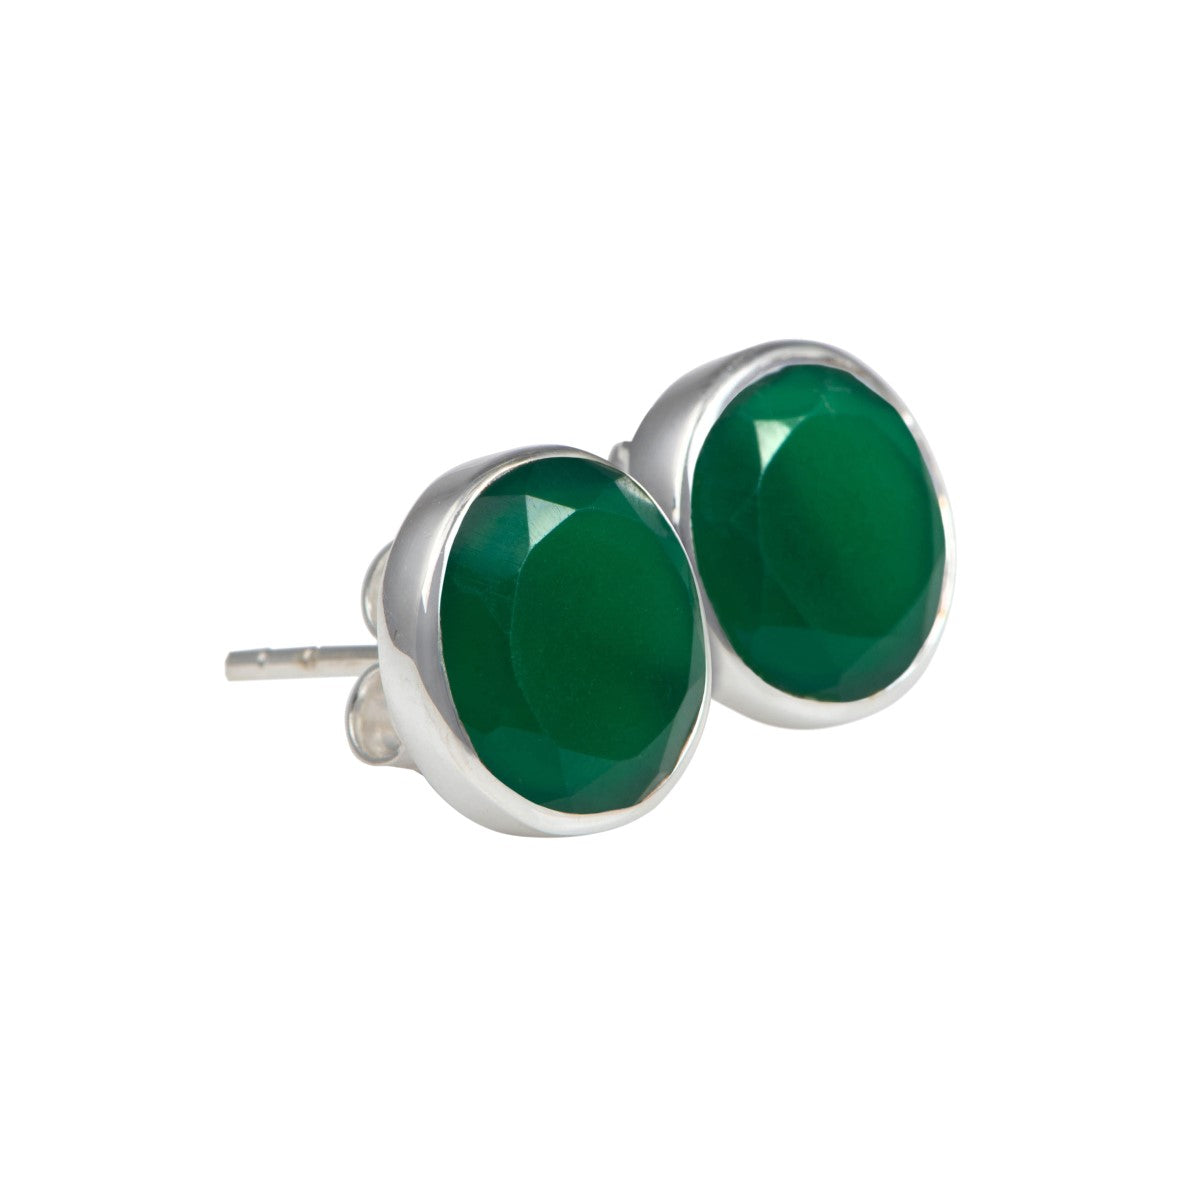 Green Onyx Studs in Sterling Silver with a Round Faceted Gemstone